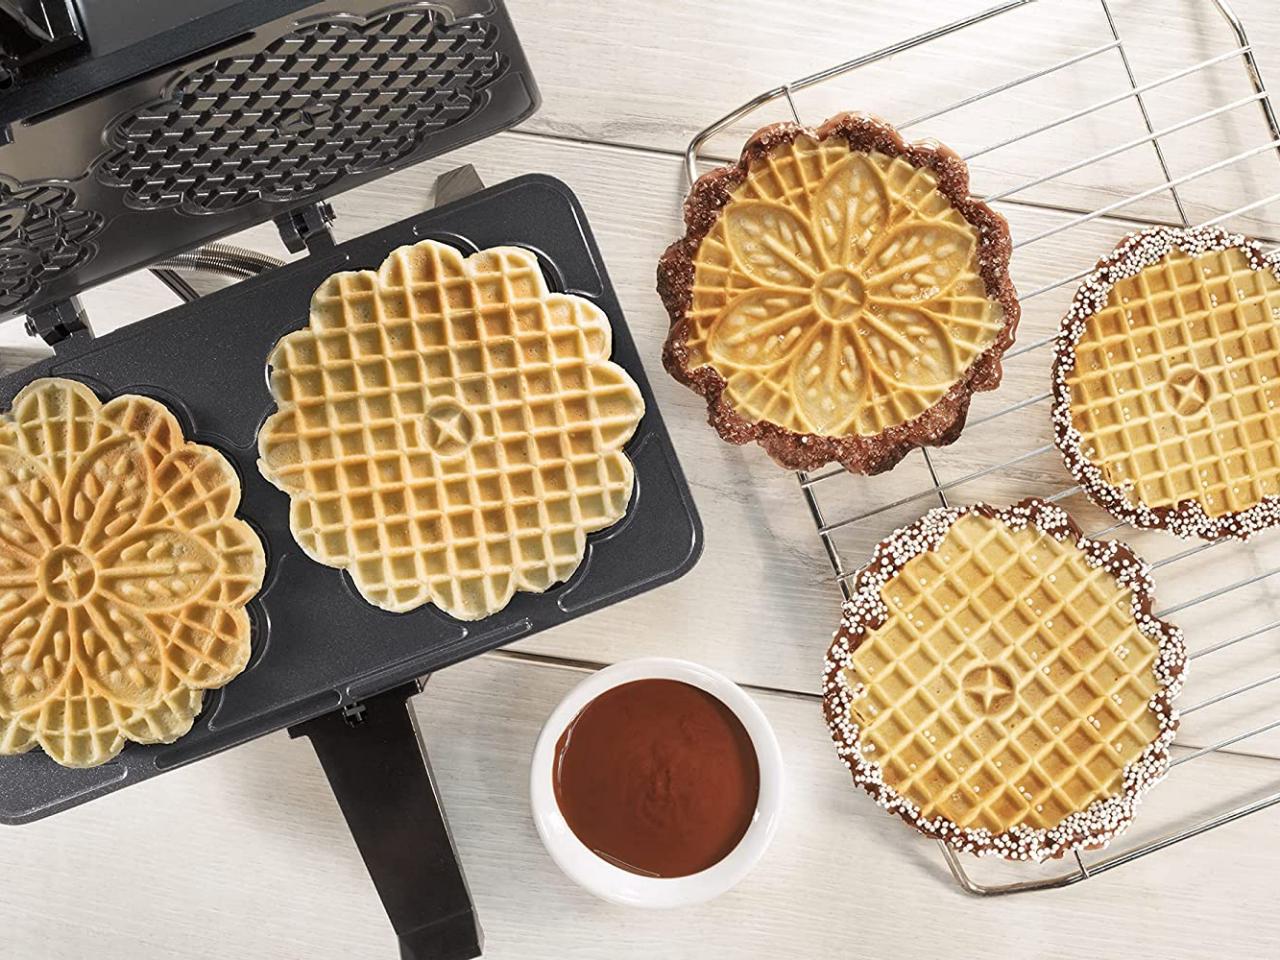 https://food.fnr.sndimg.com/content/dam/images/food/products/2021/11/18/rx_cucinapro-non-stick-electric-pizzelle-maker.jpeg.rend.hgtvcom.1280.960.suffix/1637250351787.jpeg